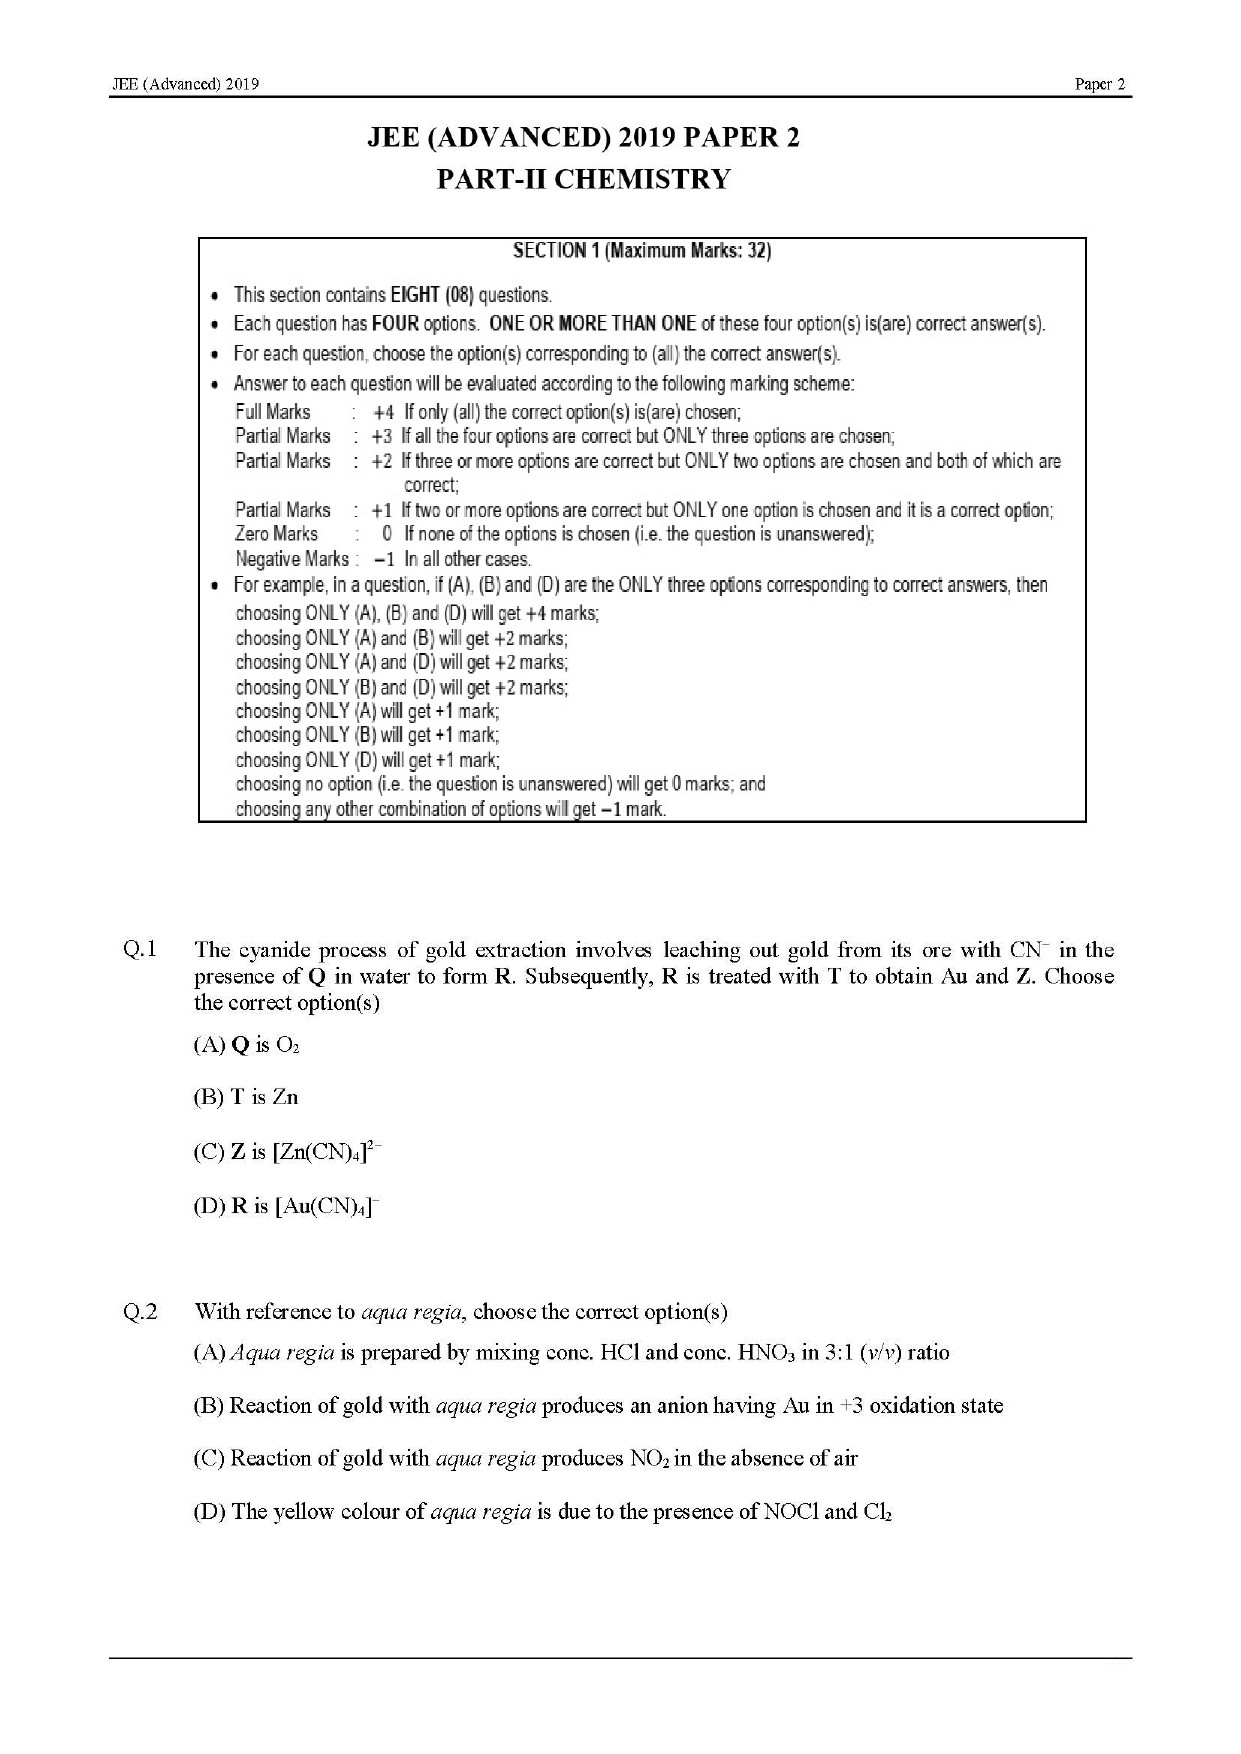 JEE Advanced English Question Paper 2019 Paper 2 Chemistry 1